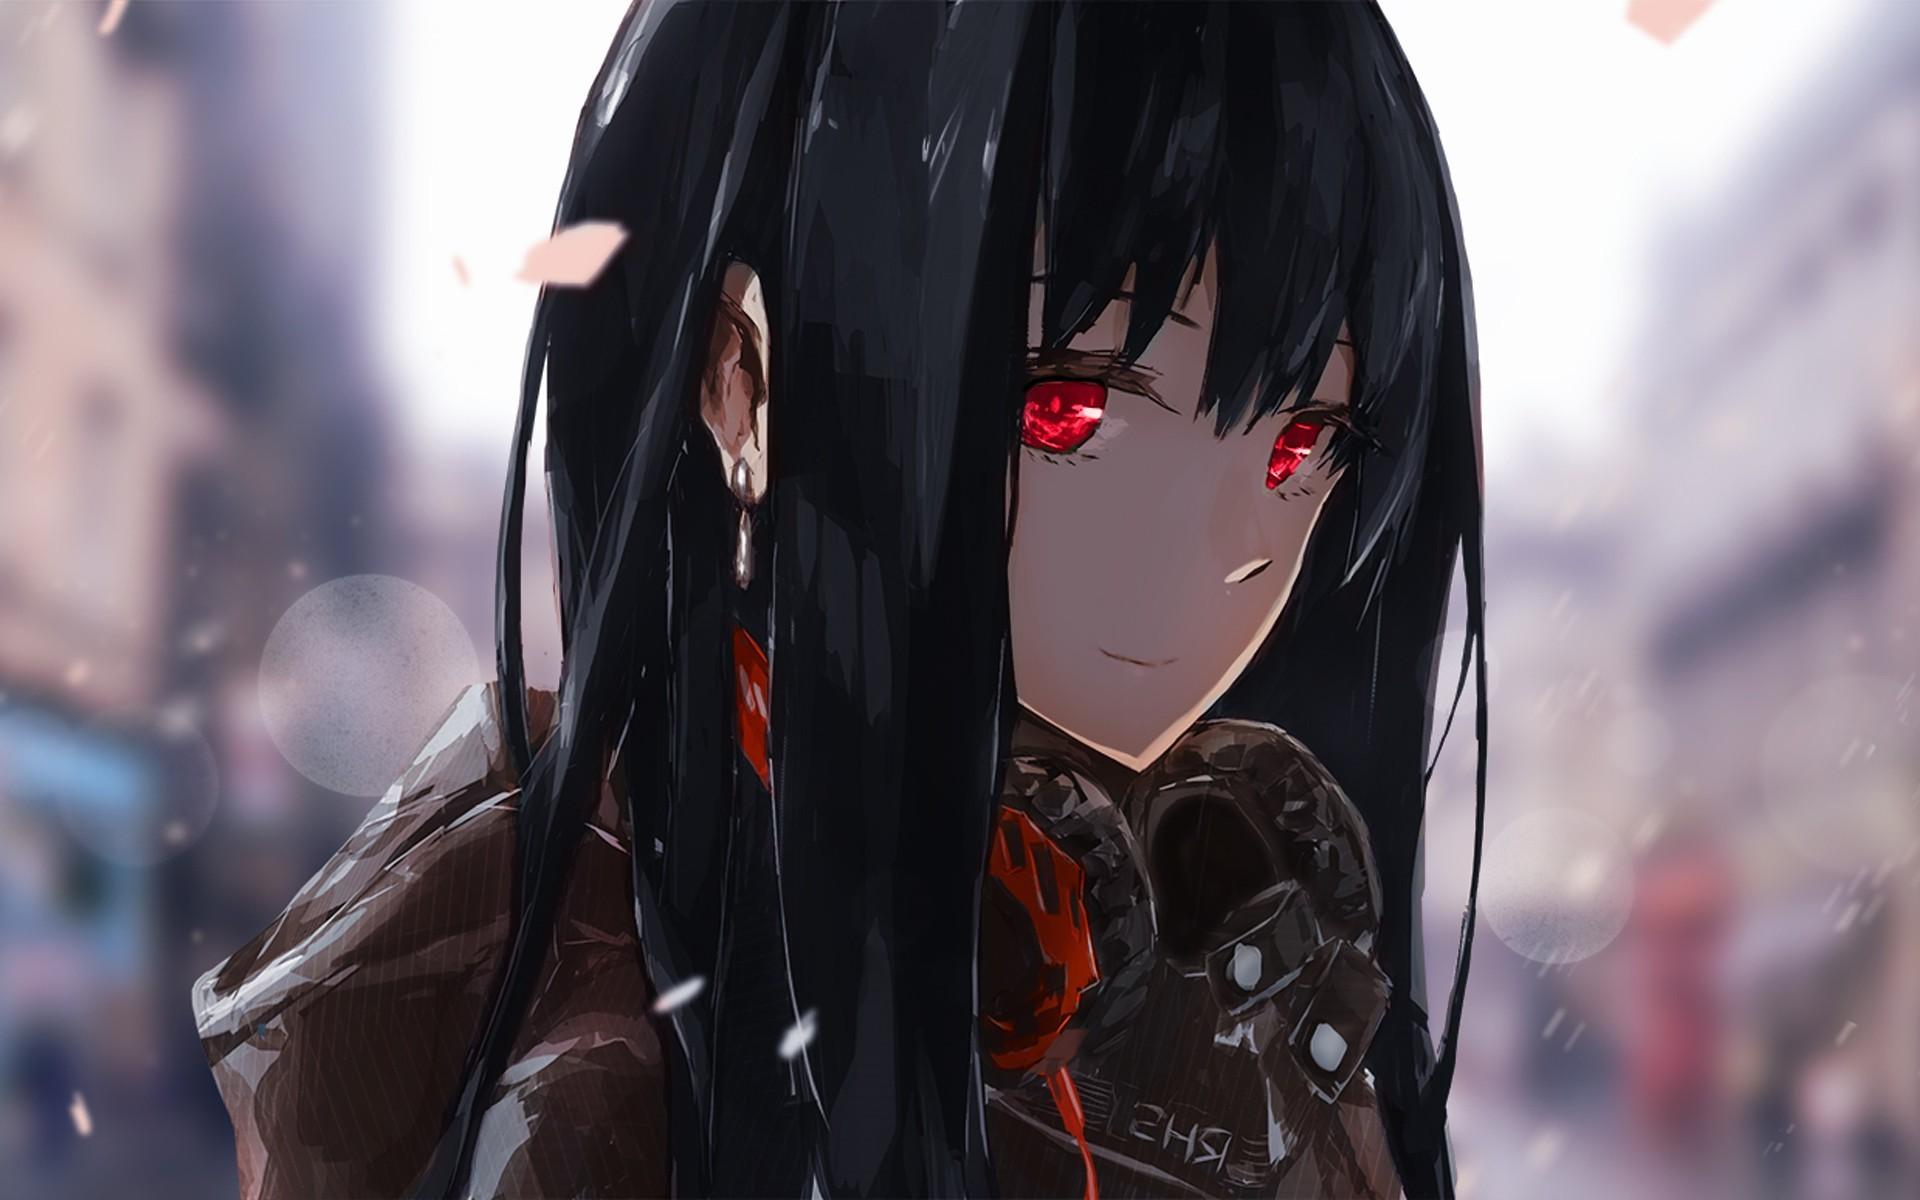 An Anime Girl Wearing A Black Top With Long Dark Hair Background,  Background Profile Pictures, Profile, Picture Background Image And  Wallpaper for Free Download